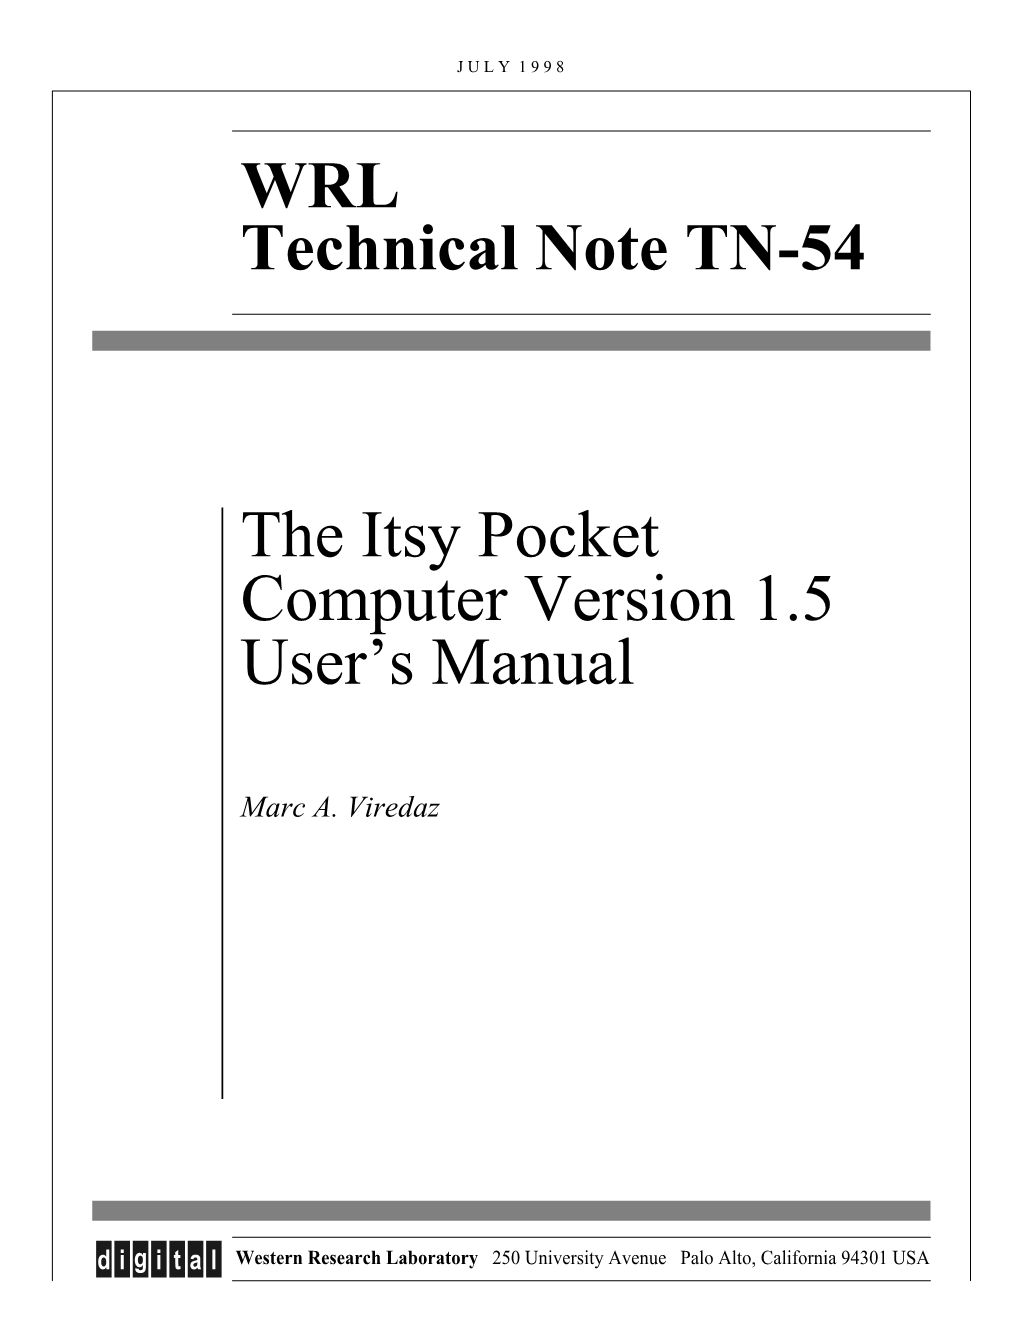 The Itsy Pocket Computer Version 1.5: User's Manual.'' Marc A